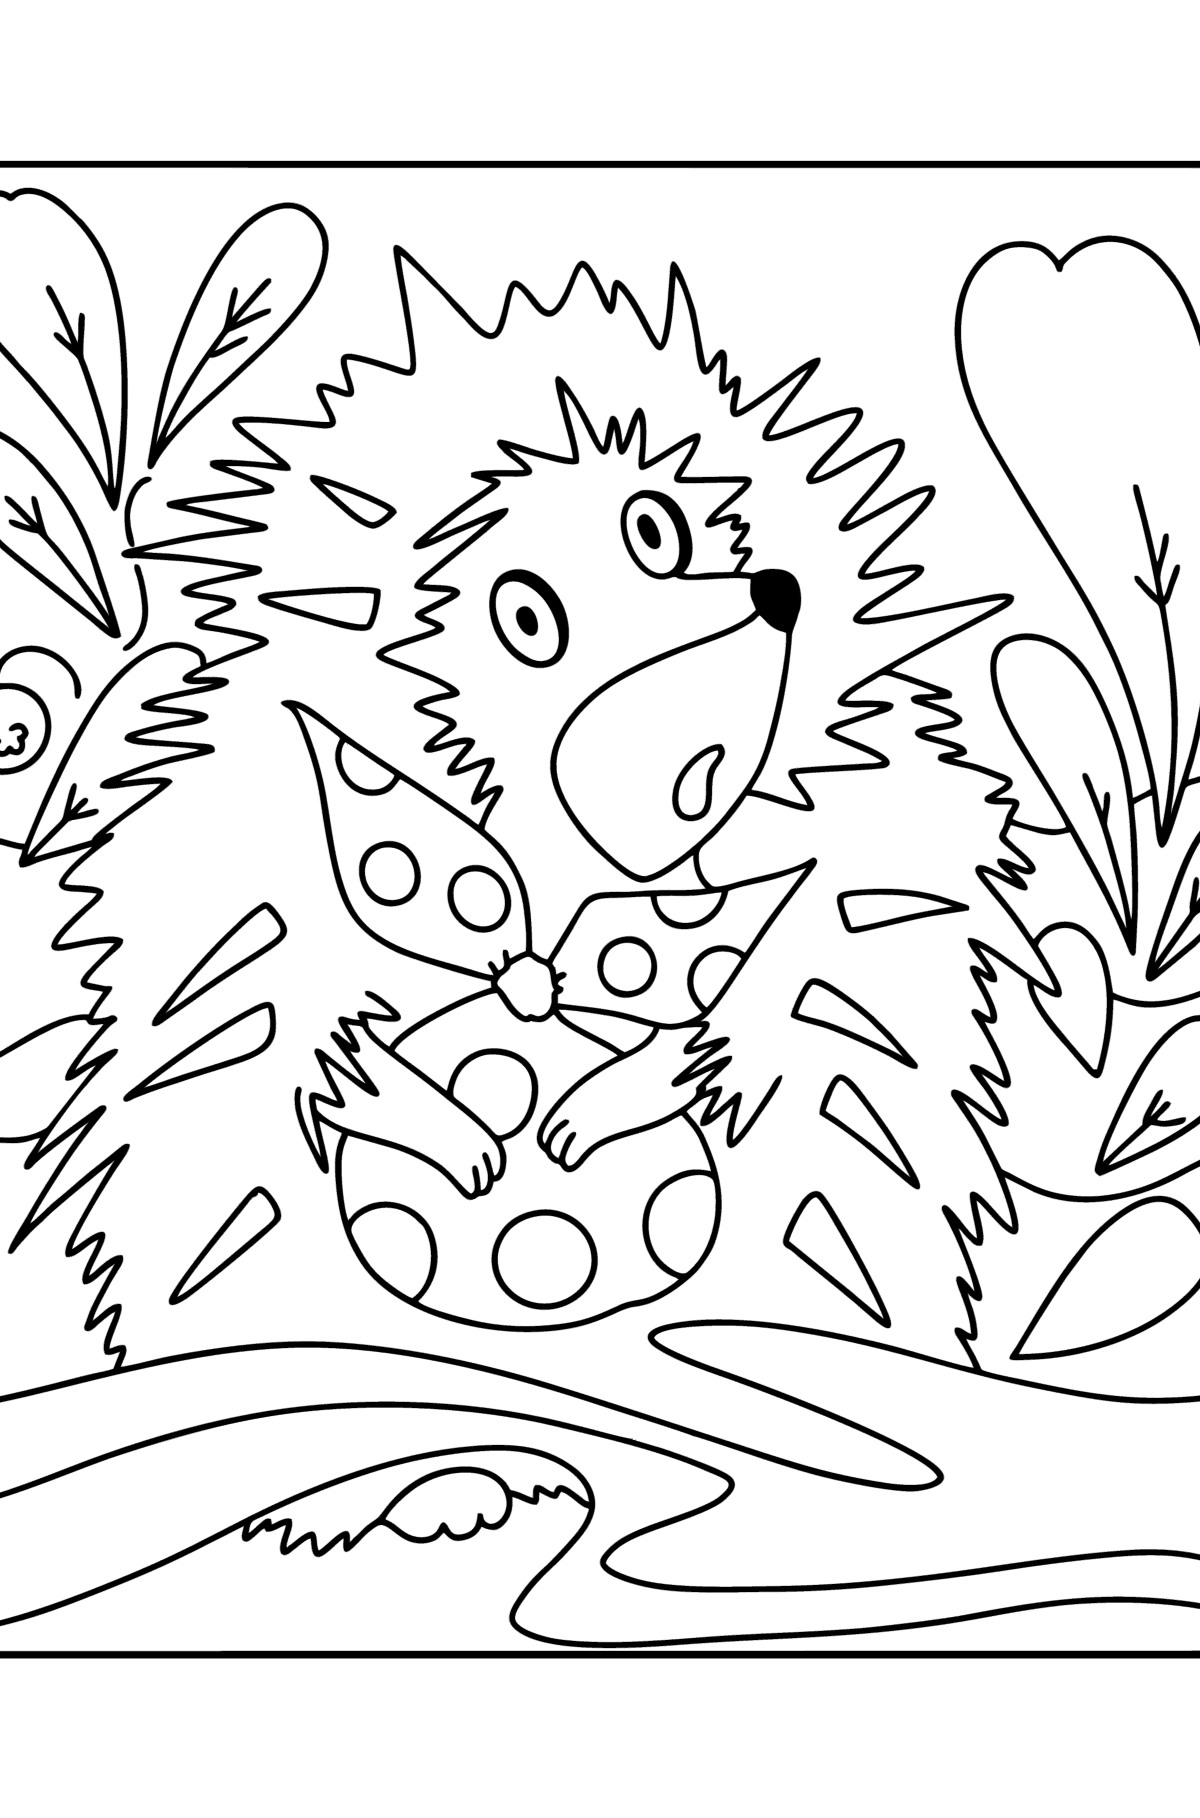 Cartoon hedgehog сoloring page - Coloring Pages for Kids